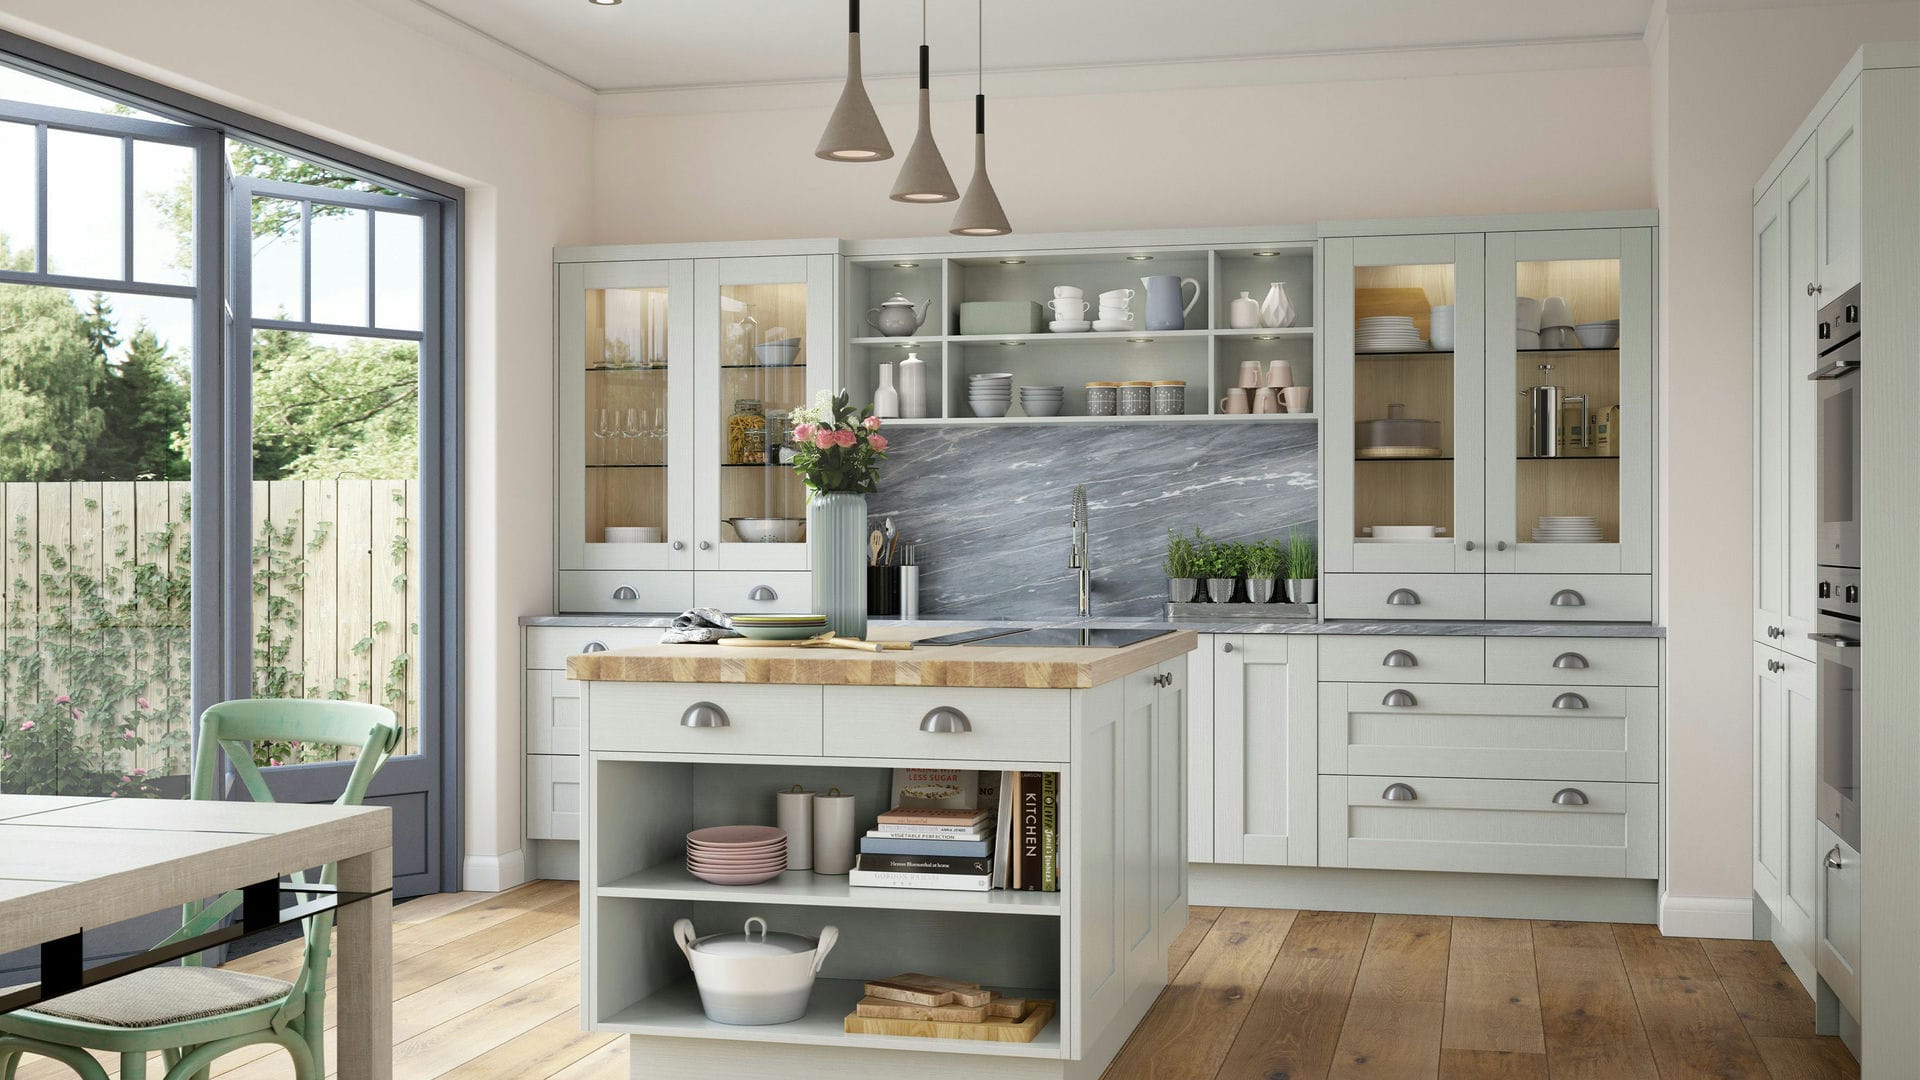 Modern shaker light grey kitchens updating the classic shaker style with a versatile grey shade